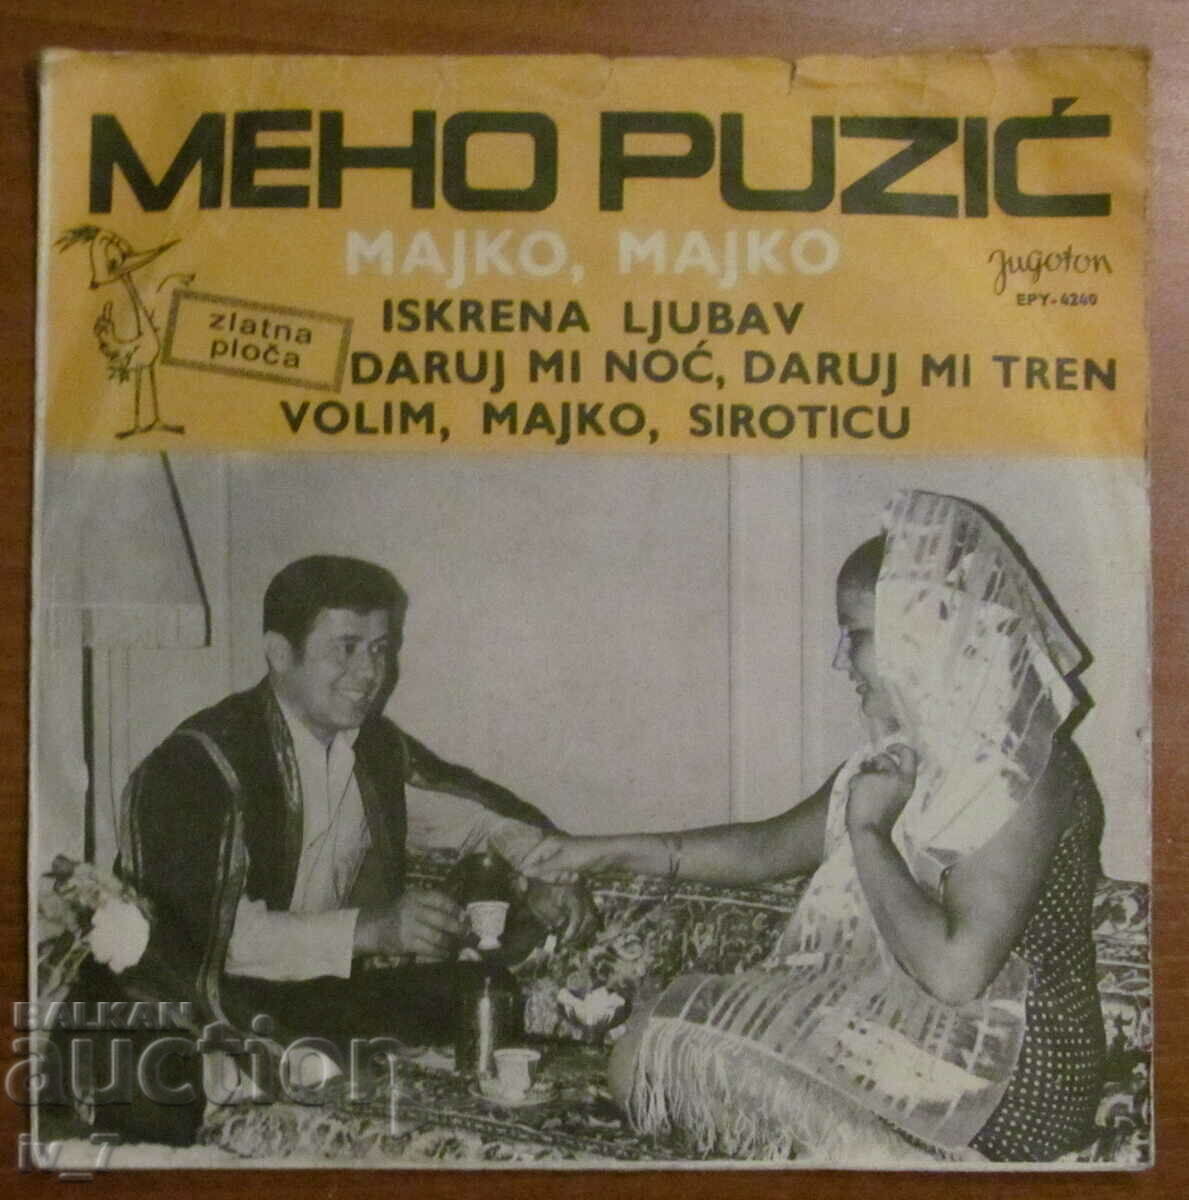 RECORD - MEHO PUZICH, small format